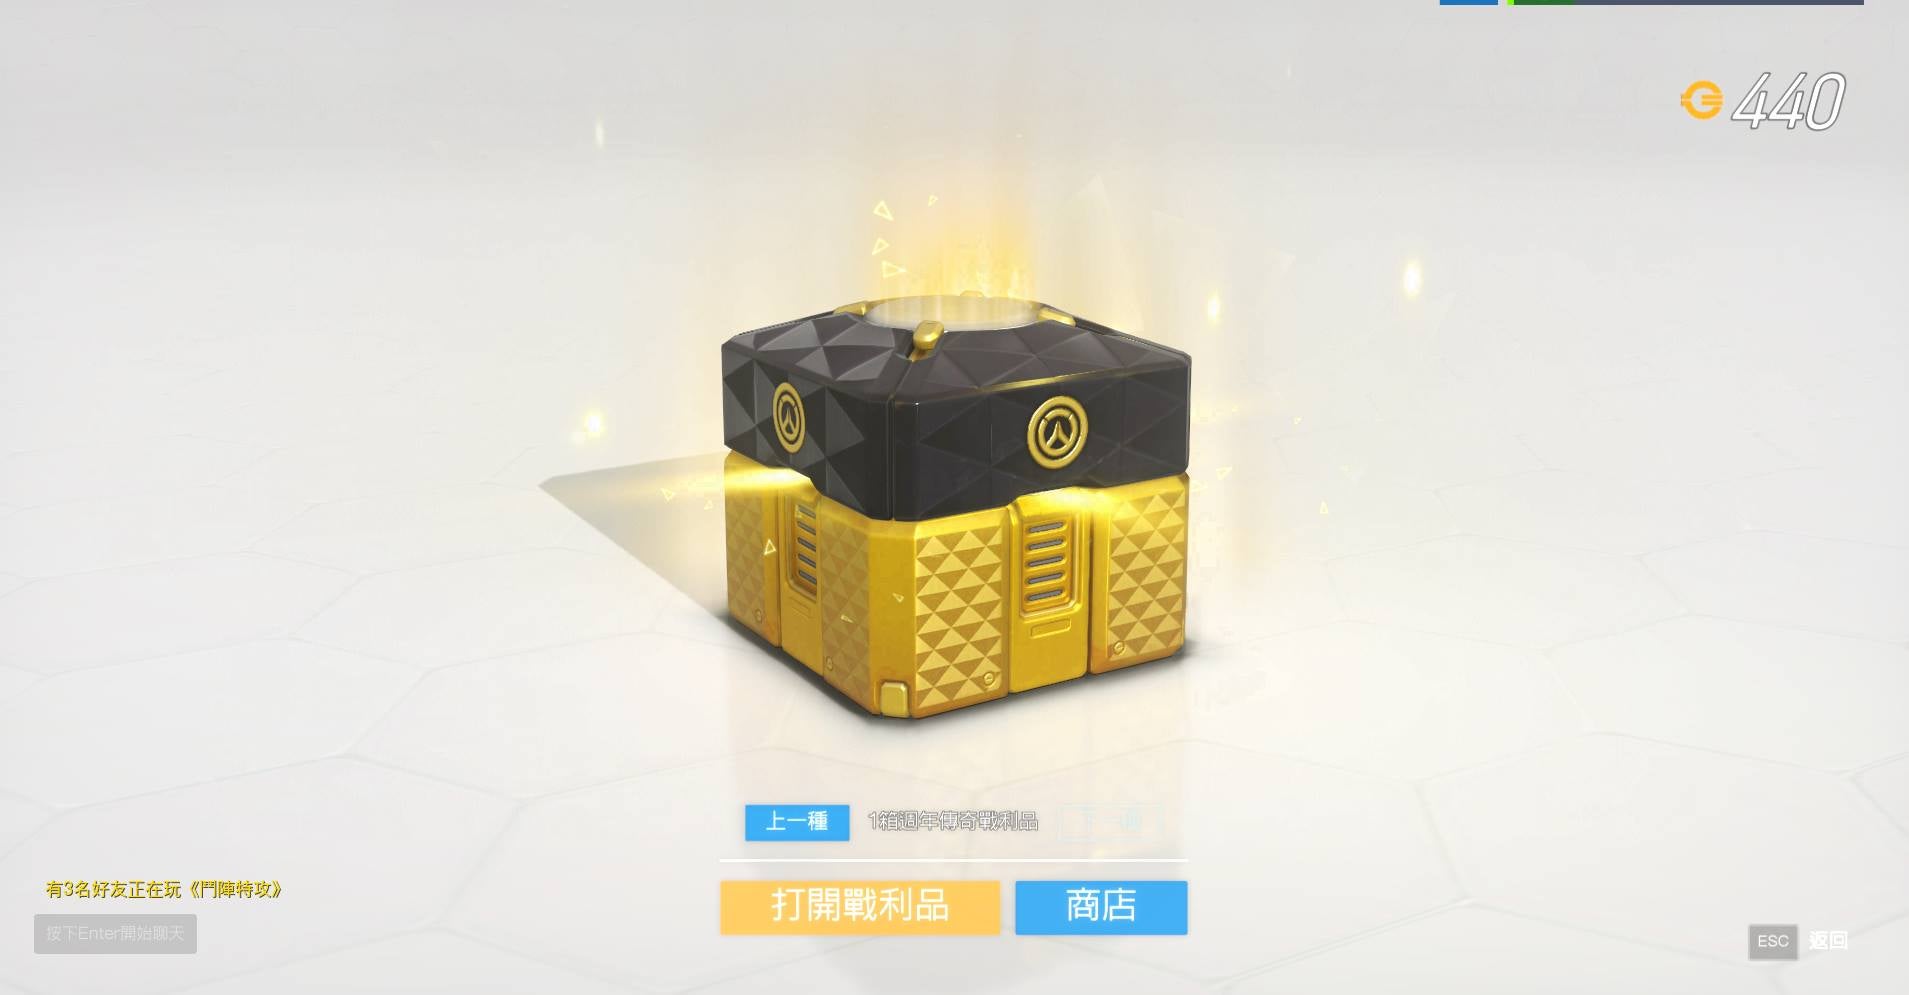 Image for Video game loot boxes are a gateway to gambling, almost a million UK children affected - Gambling Commission study